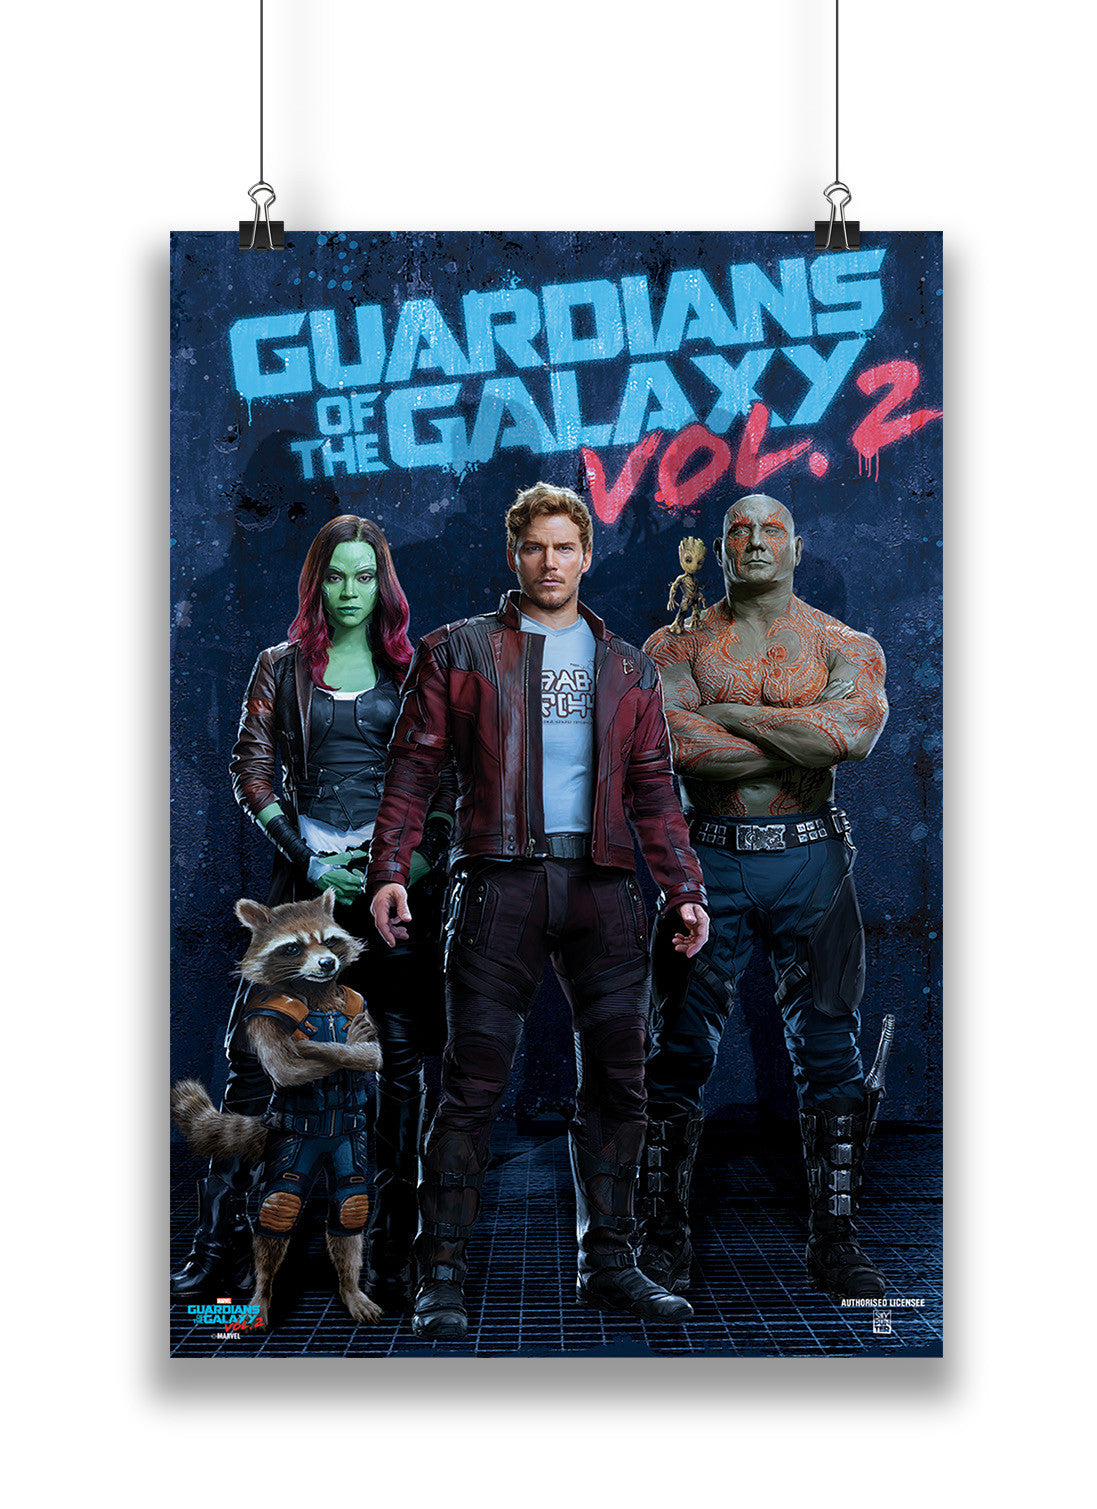 Guardians Of The Galaxy Vol 2 Movie Poster By Marvel